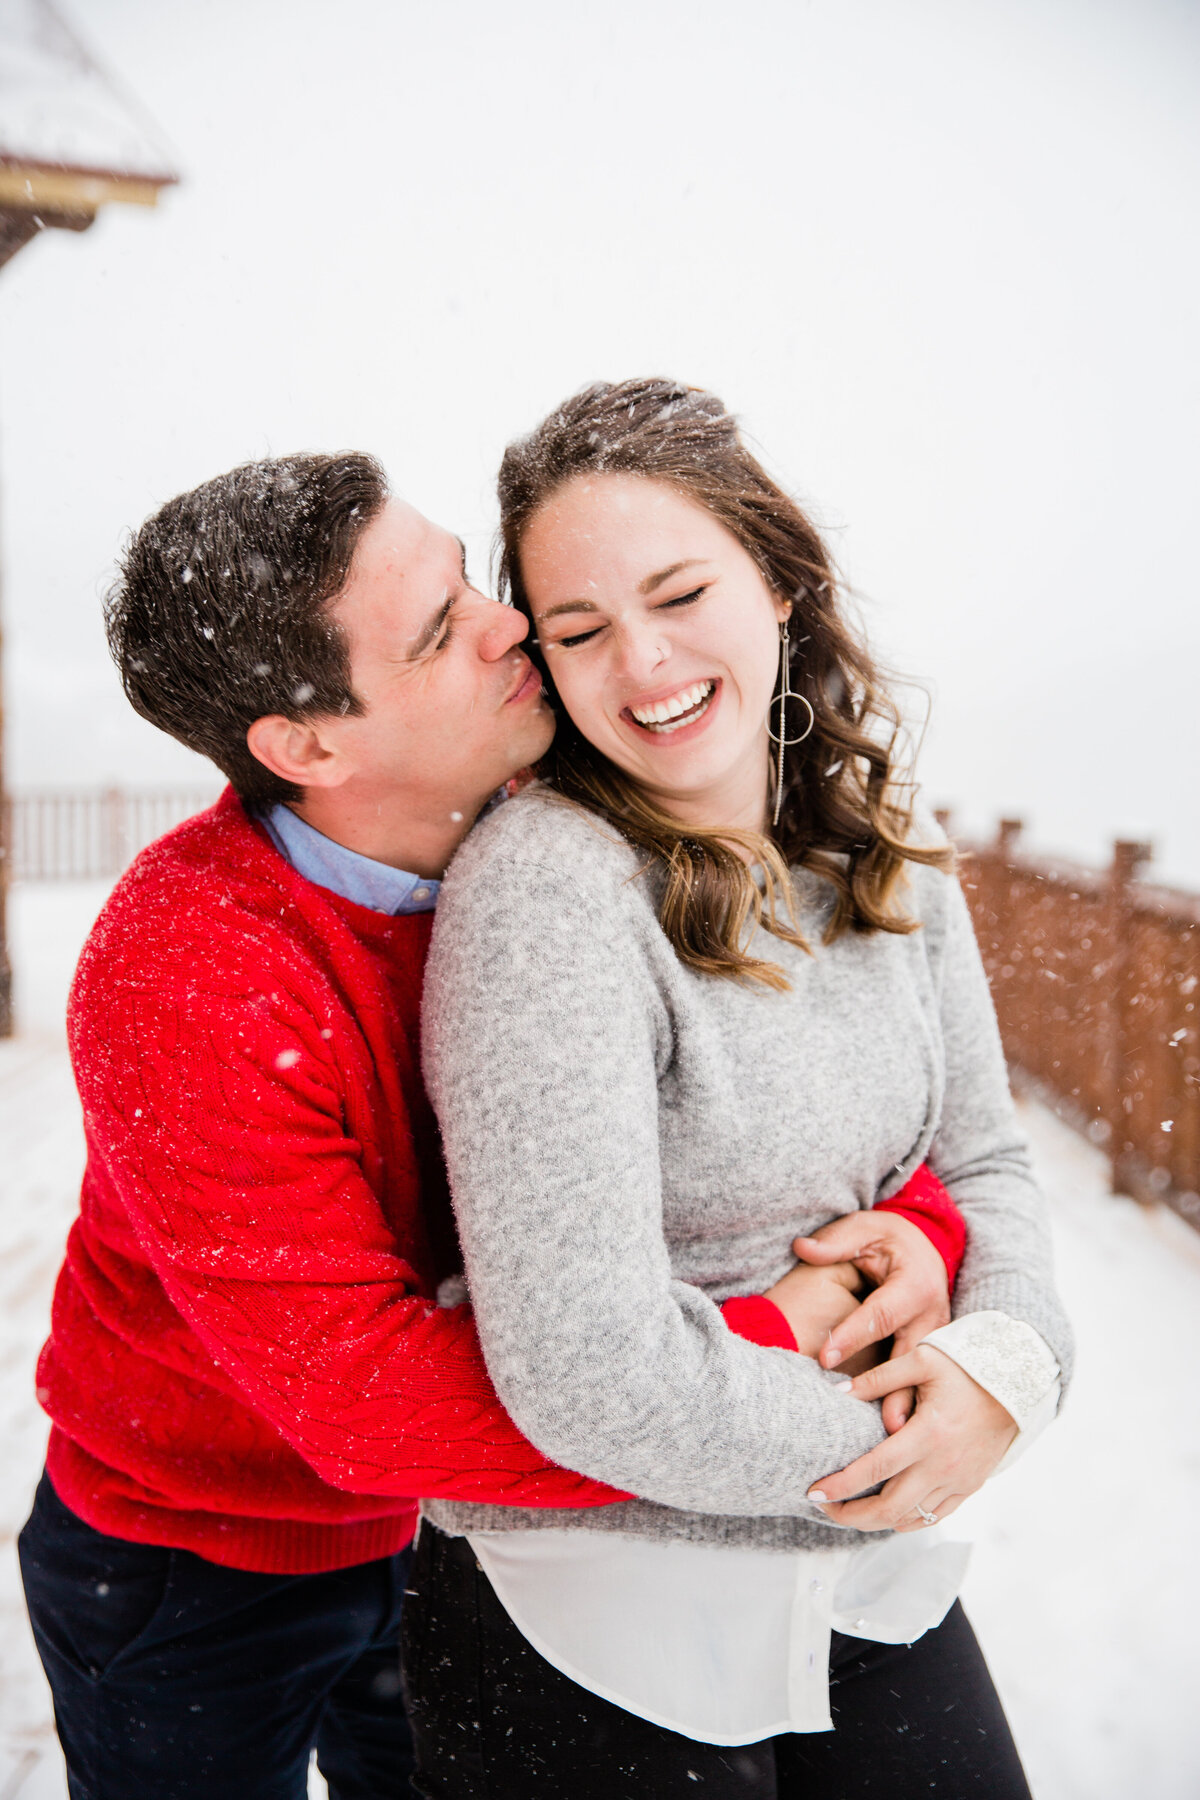 A newly engaged couple are embraced in a tight hug during a whiteout snowstorm